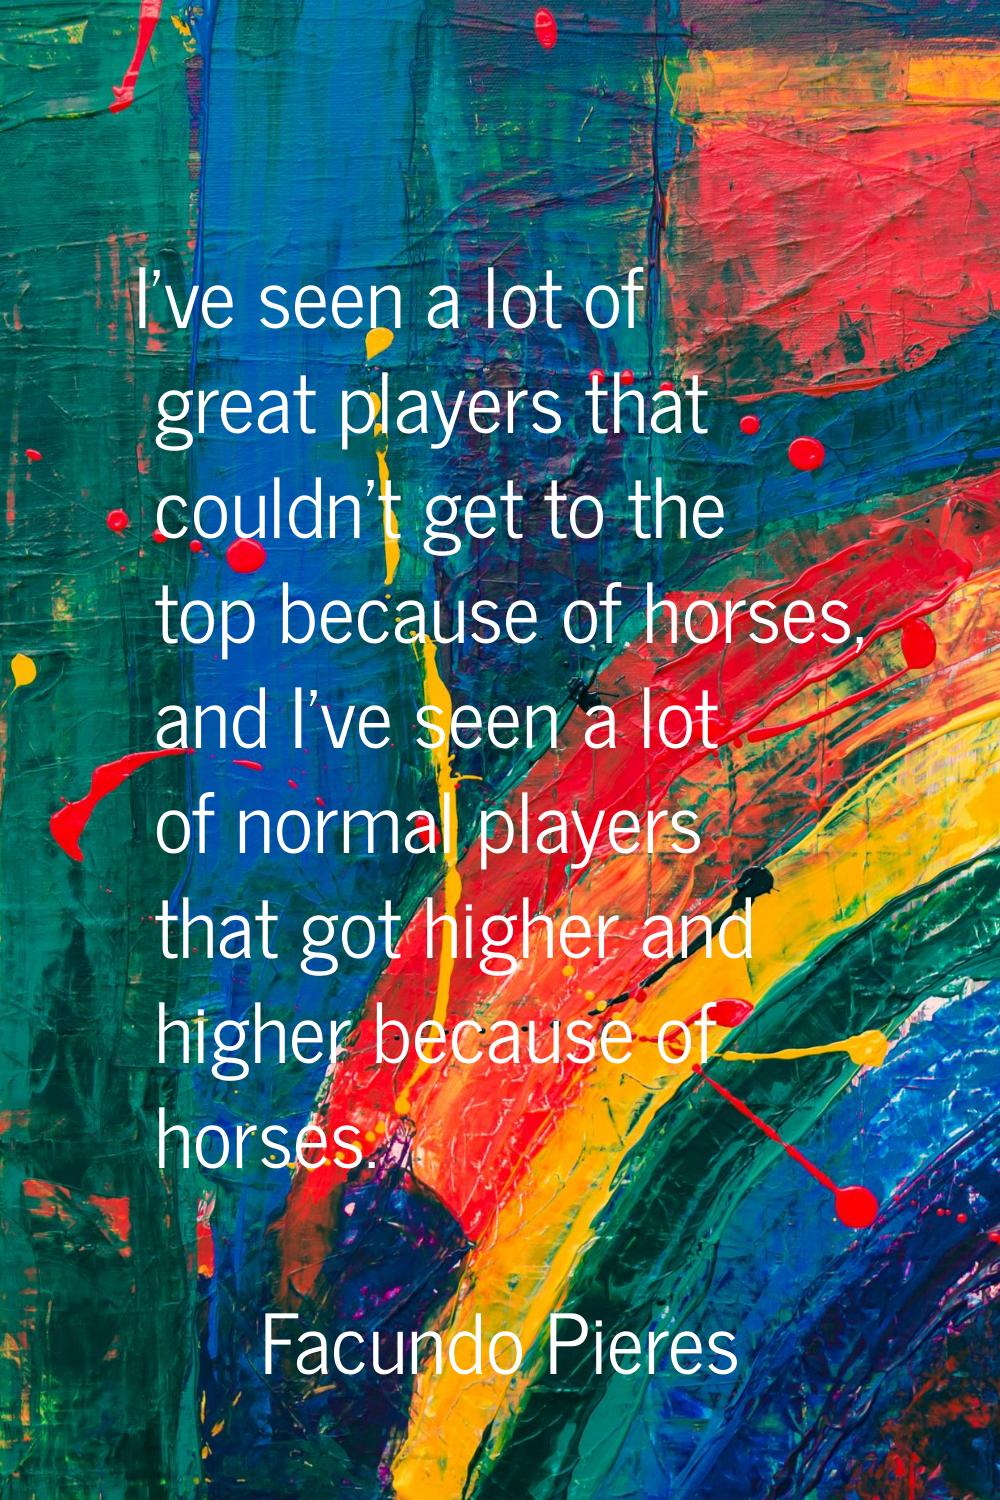 I've seen a lot of great players that couldn't get to the top because of horses, and I've seen a lo